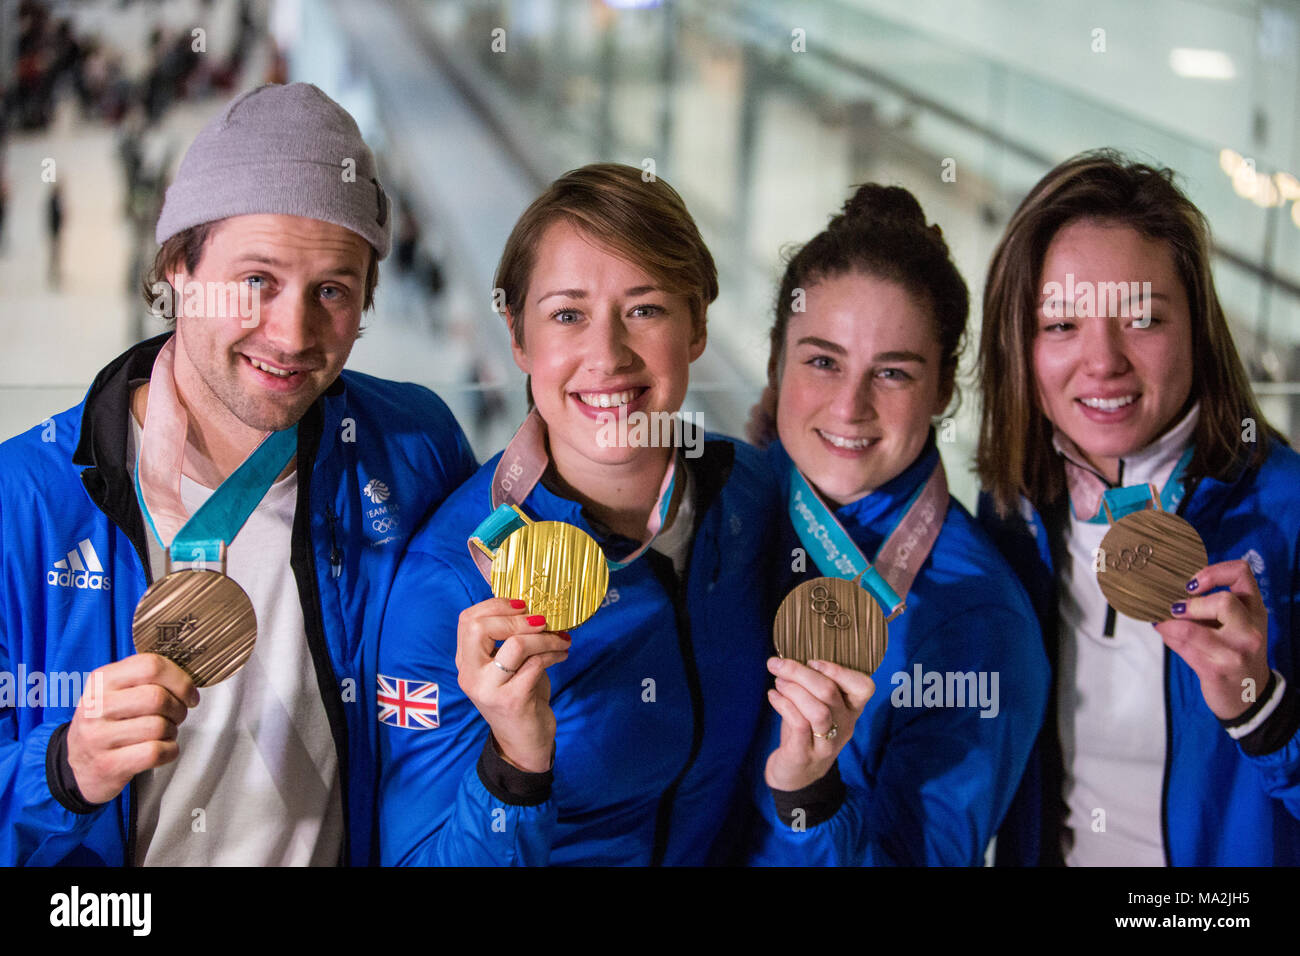 The British Olympic Association (BOA) welcome athletes home from the PyeongChang 2018 Olympic Winter Games in Korea.  Featuring: Billy Morgan, Lizzy Yarnold, Laura Deas, Izzy Atkin Where: London, England, United Kingdom When: 26 Feb 2018 Credit: Wheatley/WENN Stock Photo